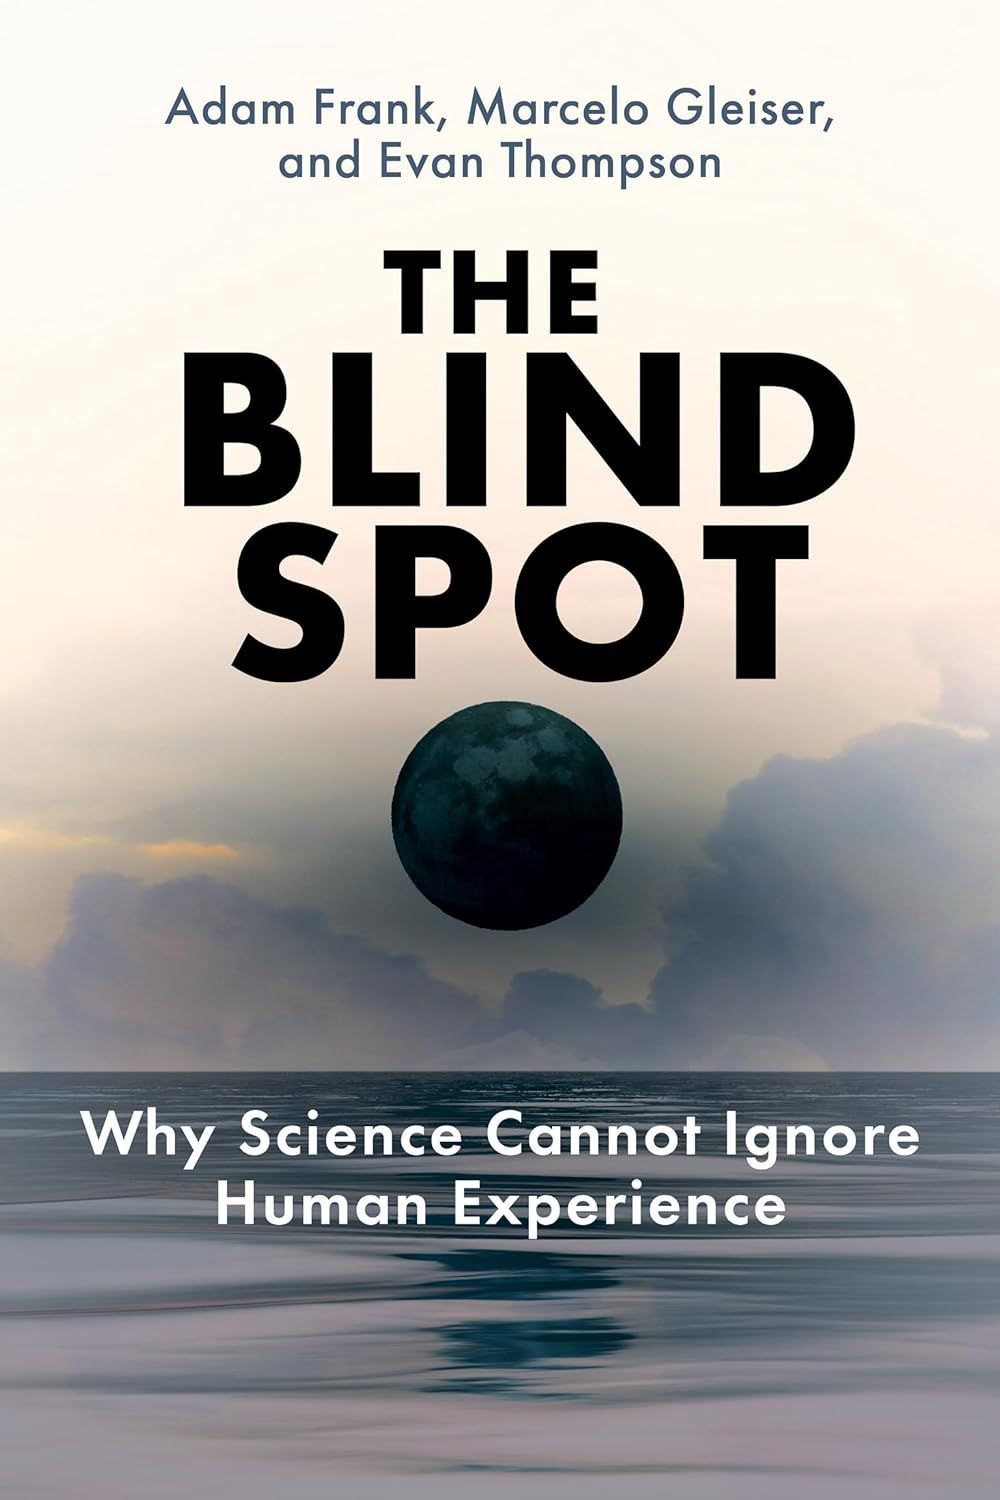 What Scientists Can’t See: On Adam Frank, Marcelo Gleiser, and Evan Thompson’s “The Blind Spot”